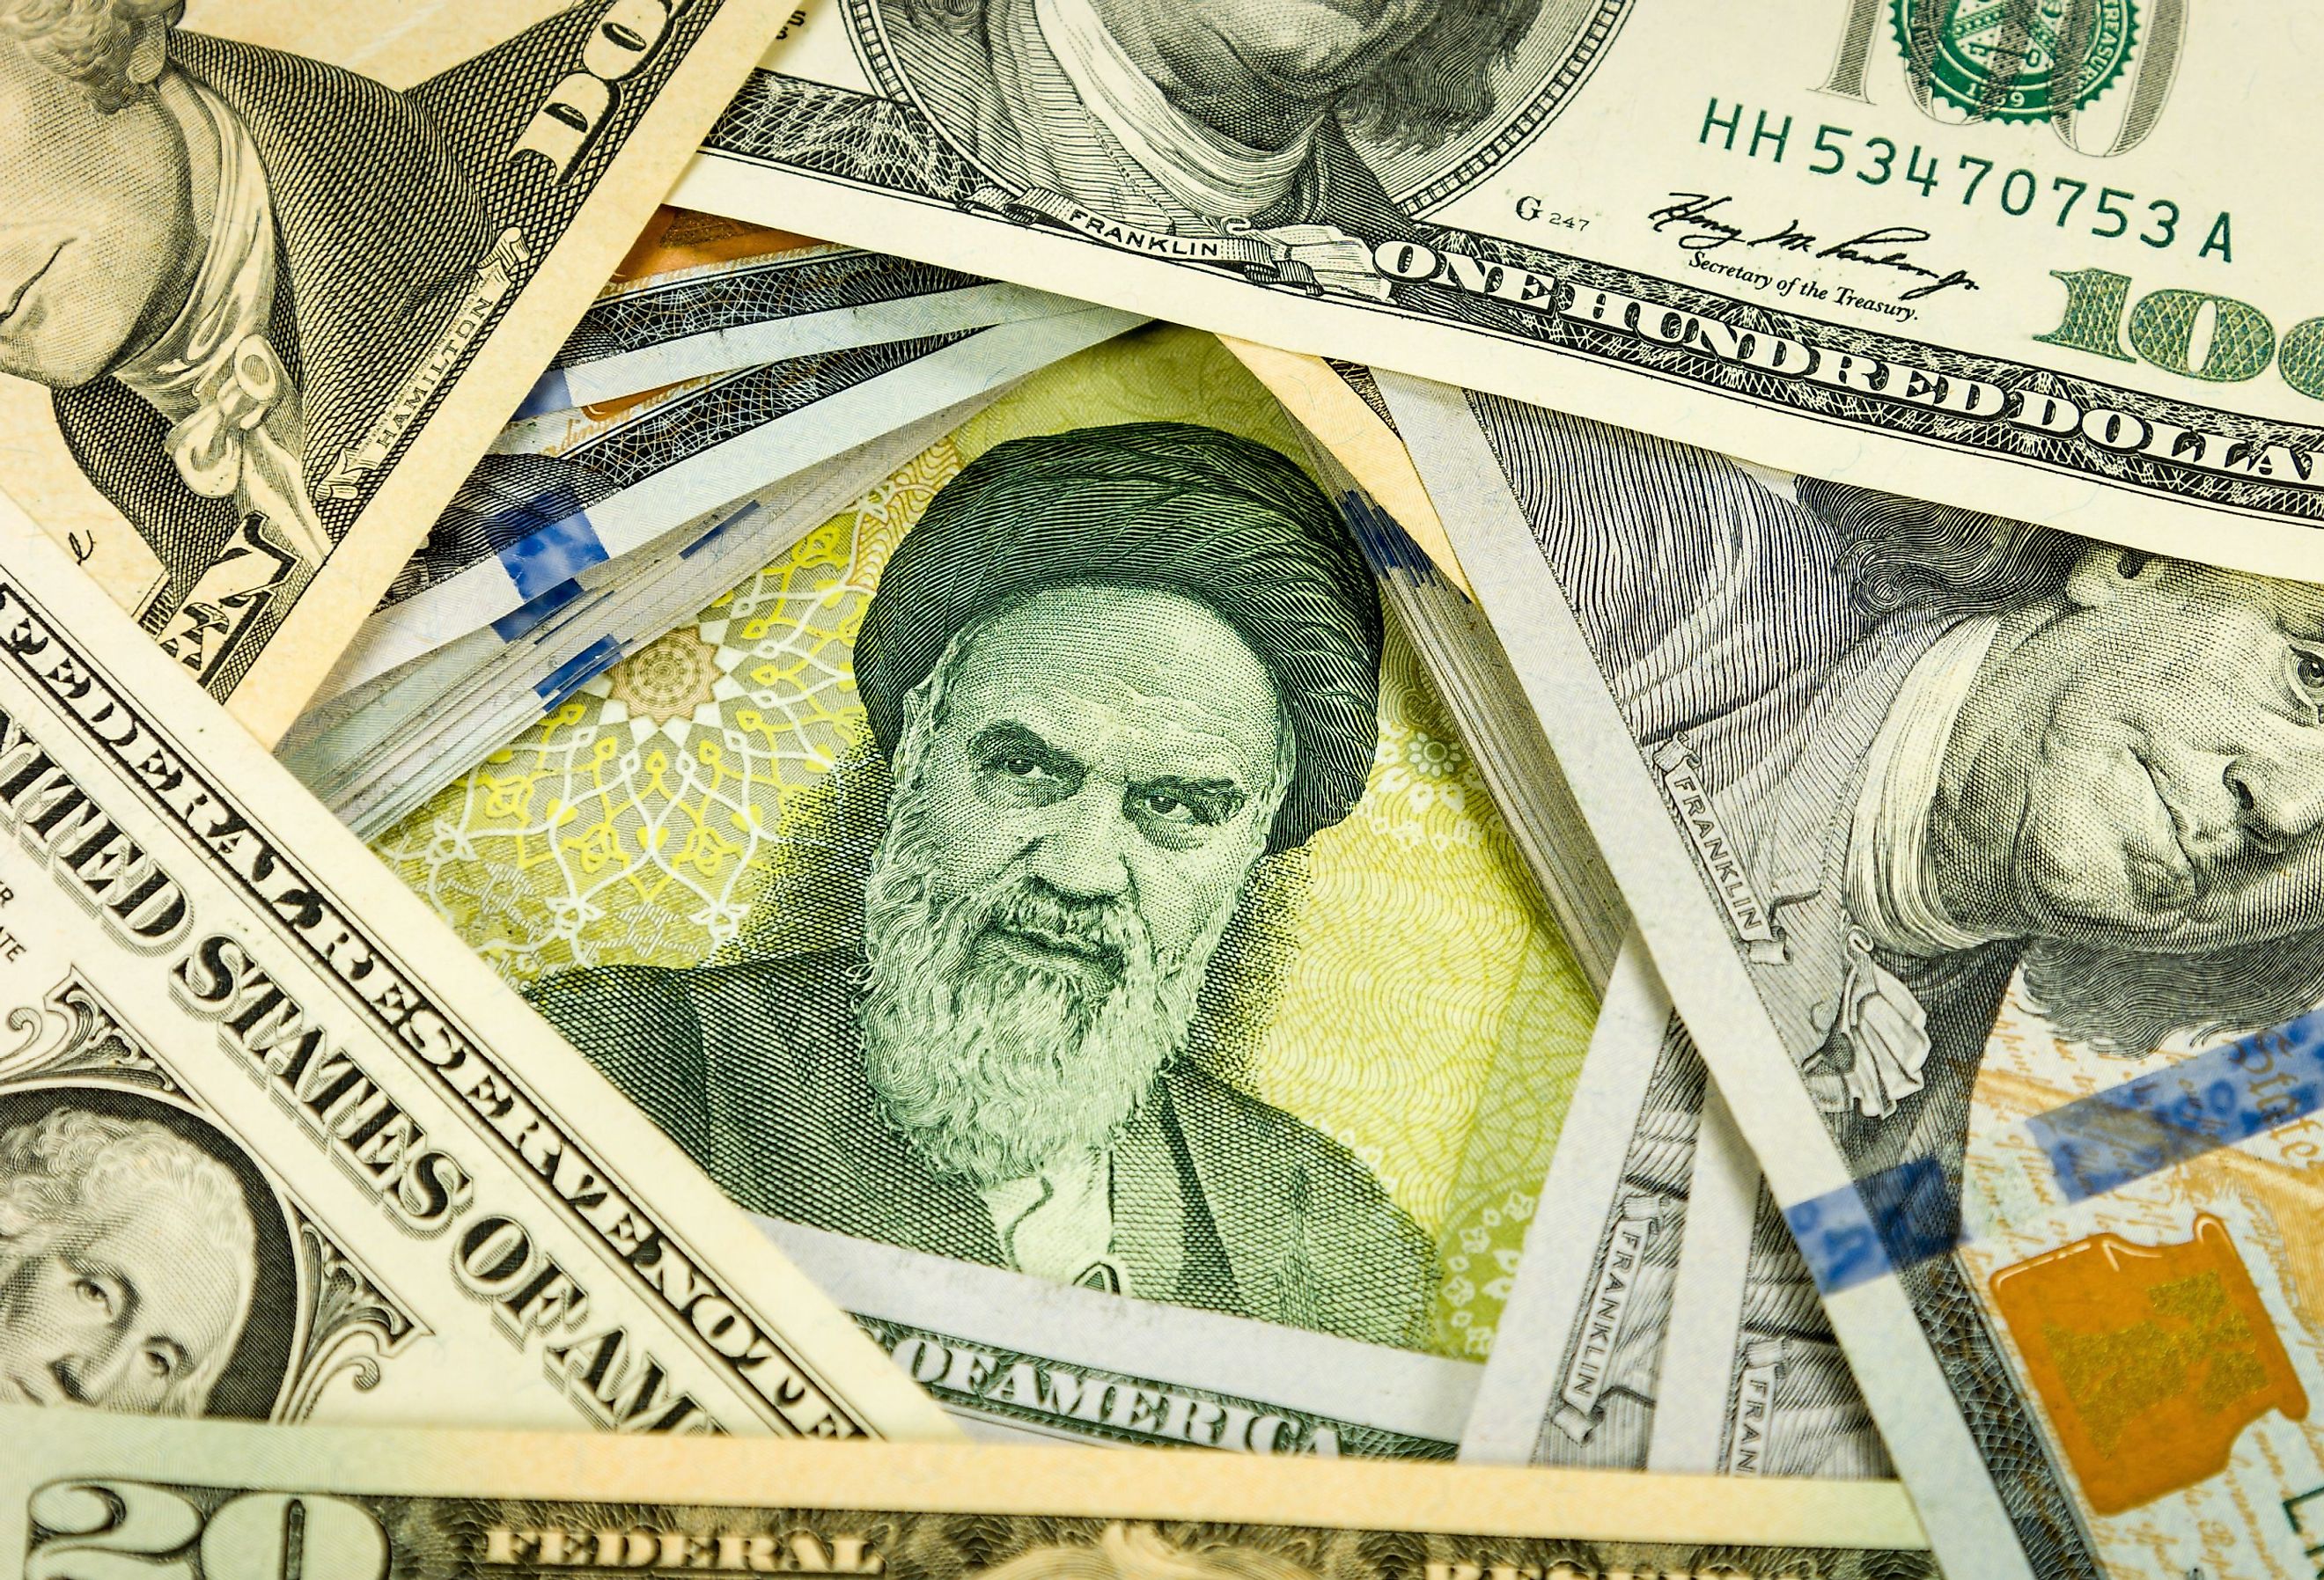 The Iranian Rial stands as one of the cheapest currencies in the world, with a current exchange rate of approximately 41,800 Rials for one US dollar. Image credit Maxim Vasiliev via Shutterstock